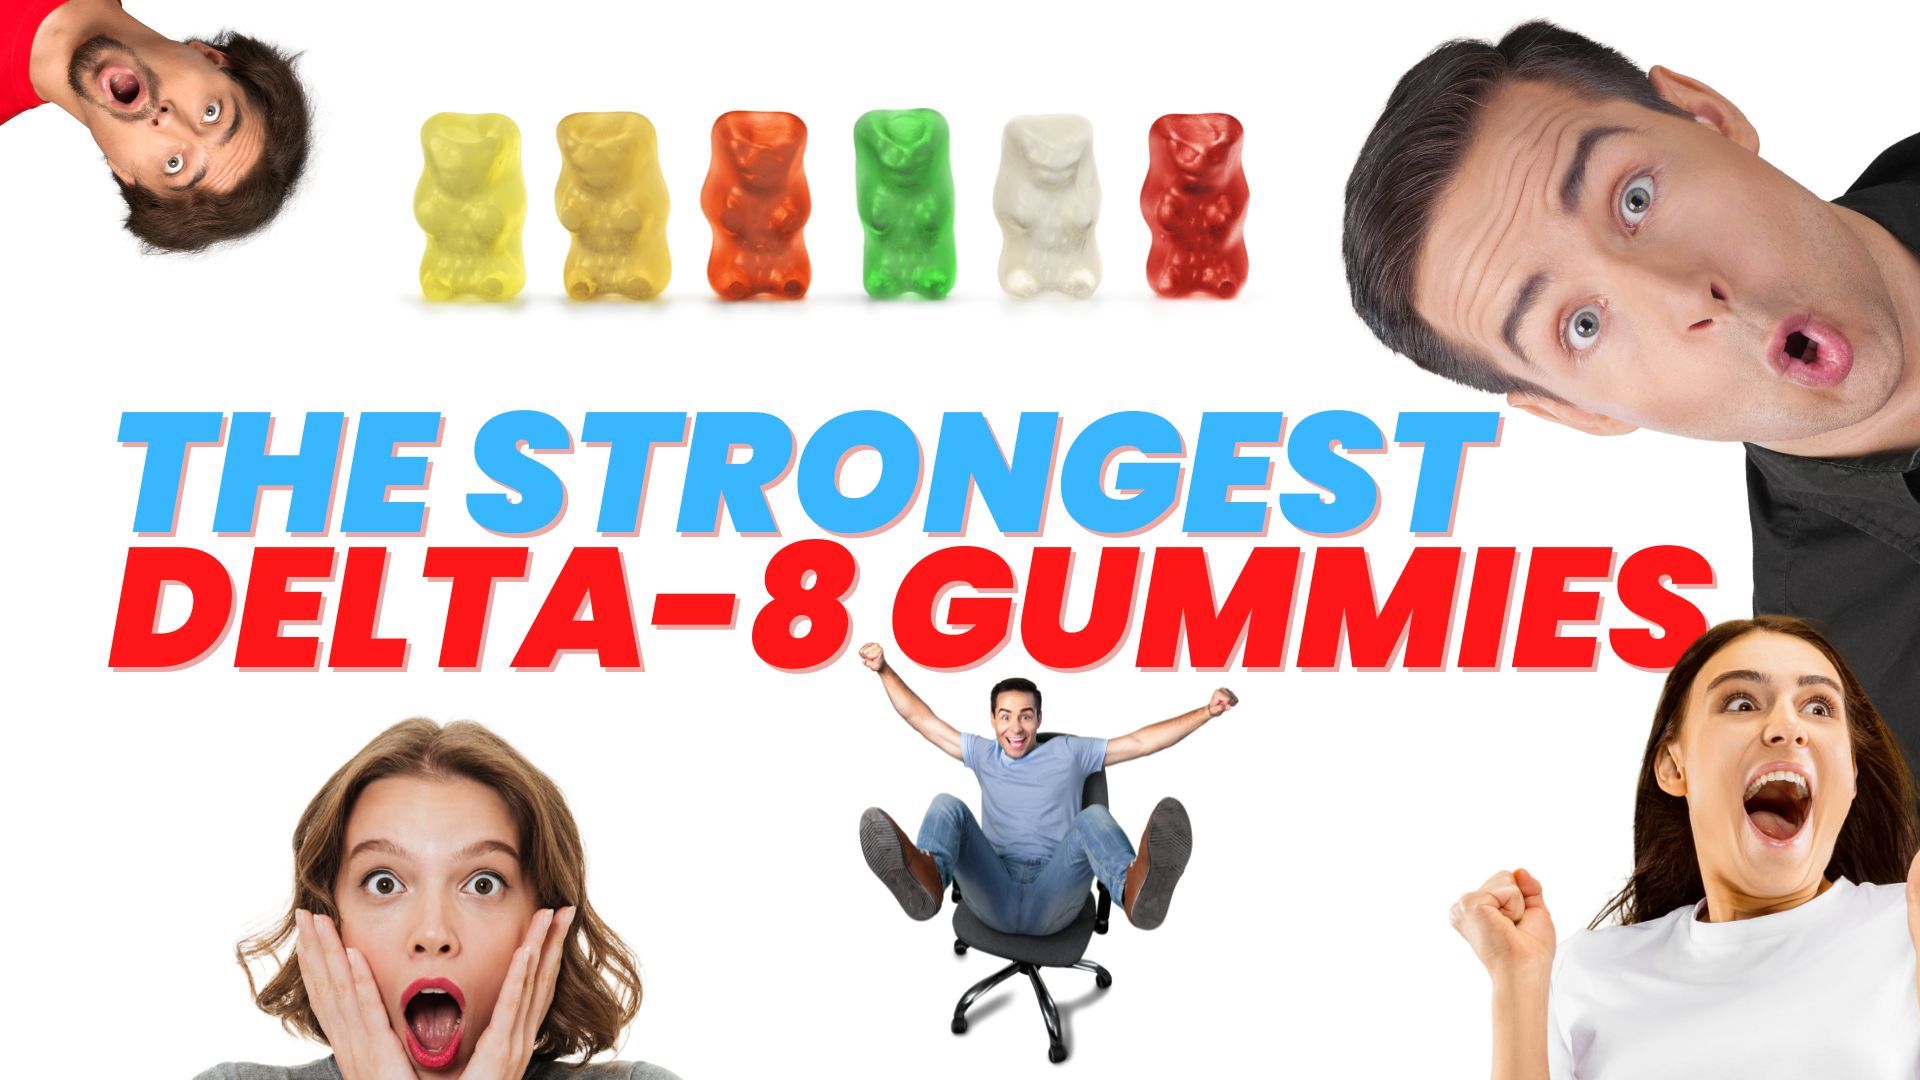 You are currently viewing How To Find the Strongest Delta 8 Gummies